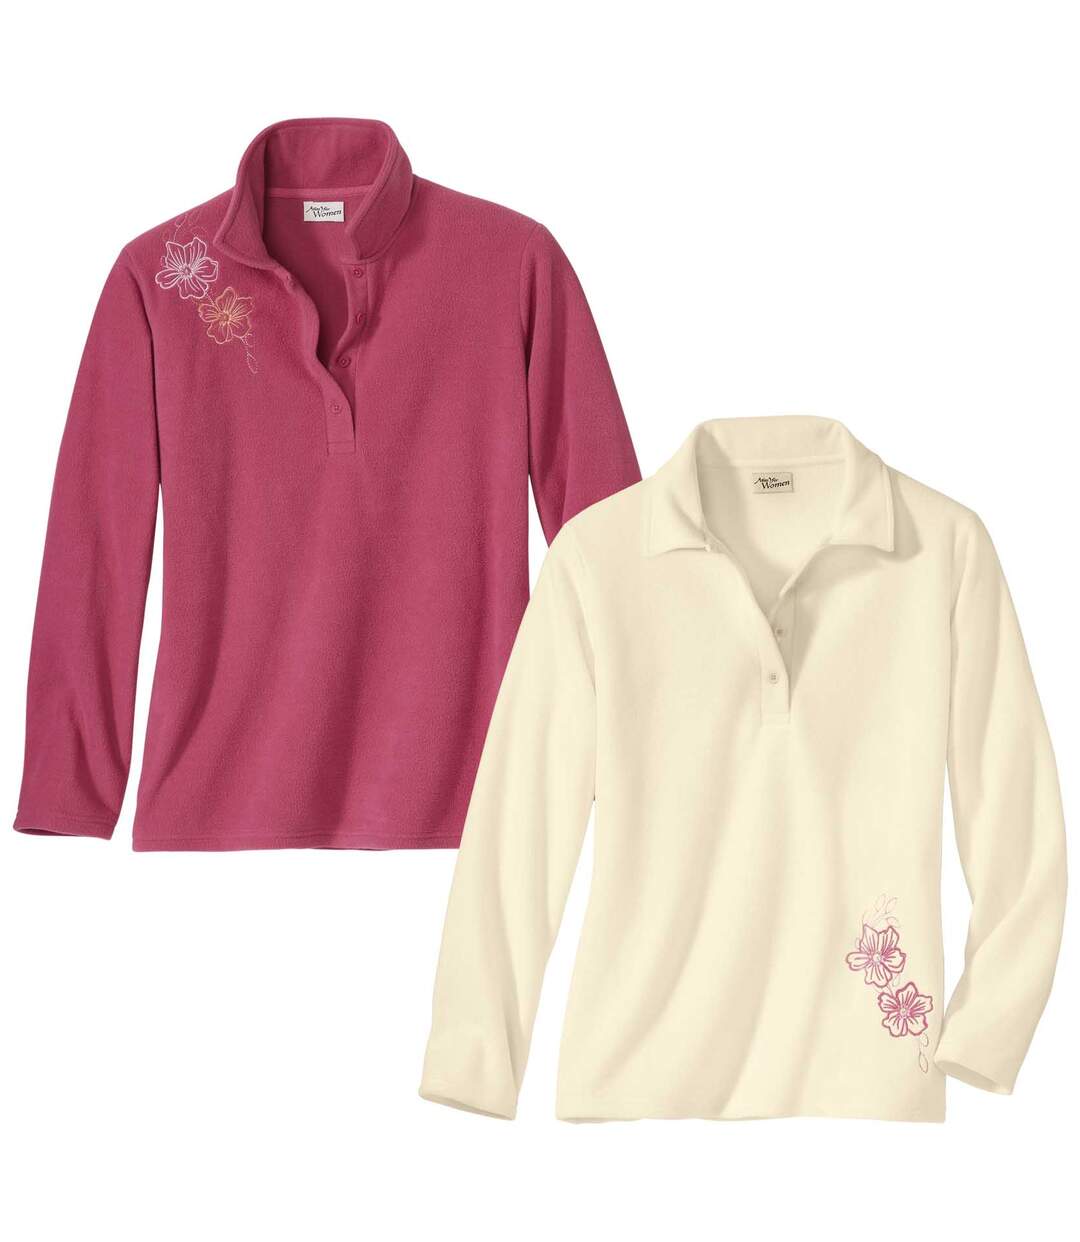 Pack of 2 Women's Embroidered Microfleece Pullovers - Pink White Atlas For Men